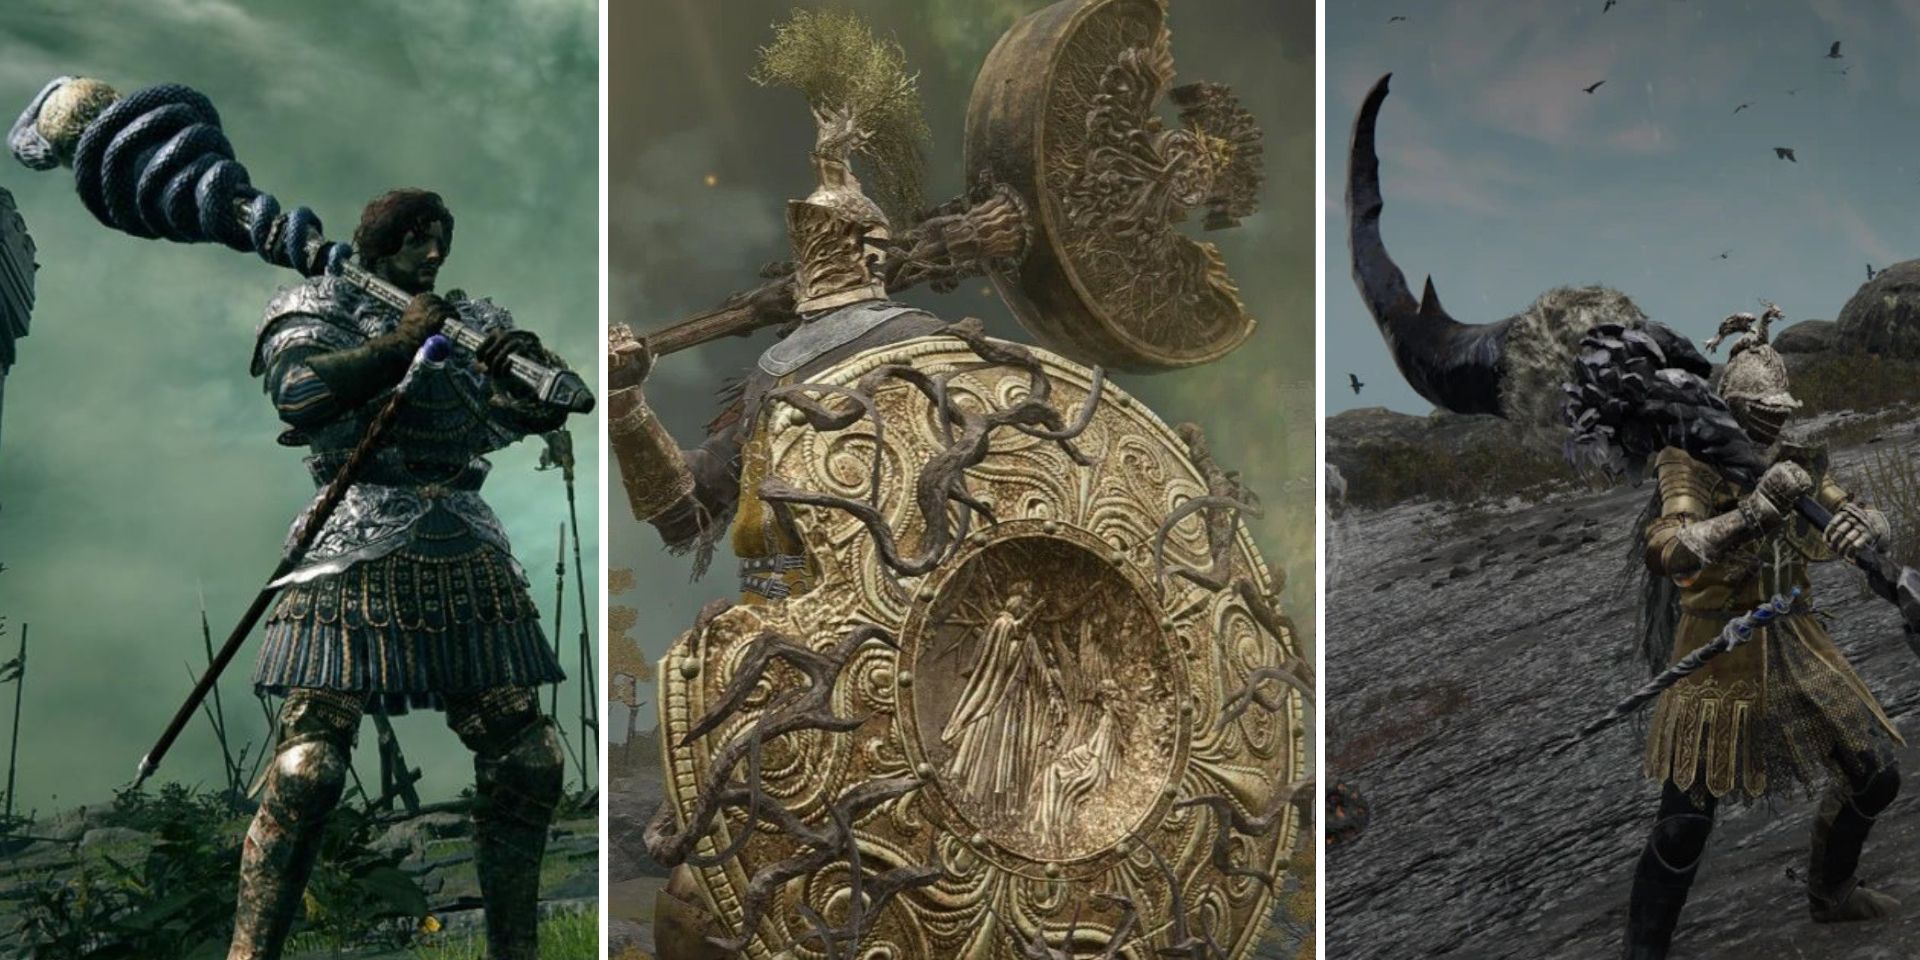 Best Elden Ring builds guide: 7 builds for conquering the Lands Between